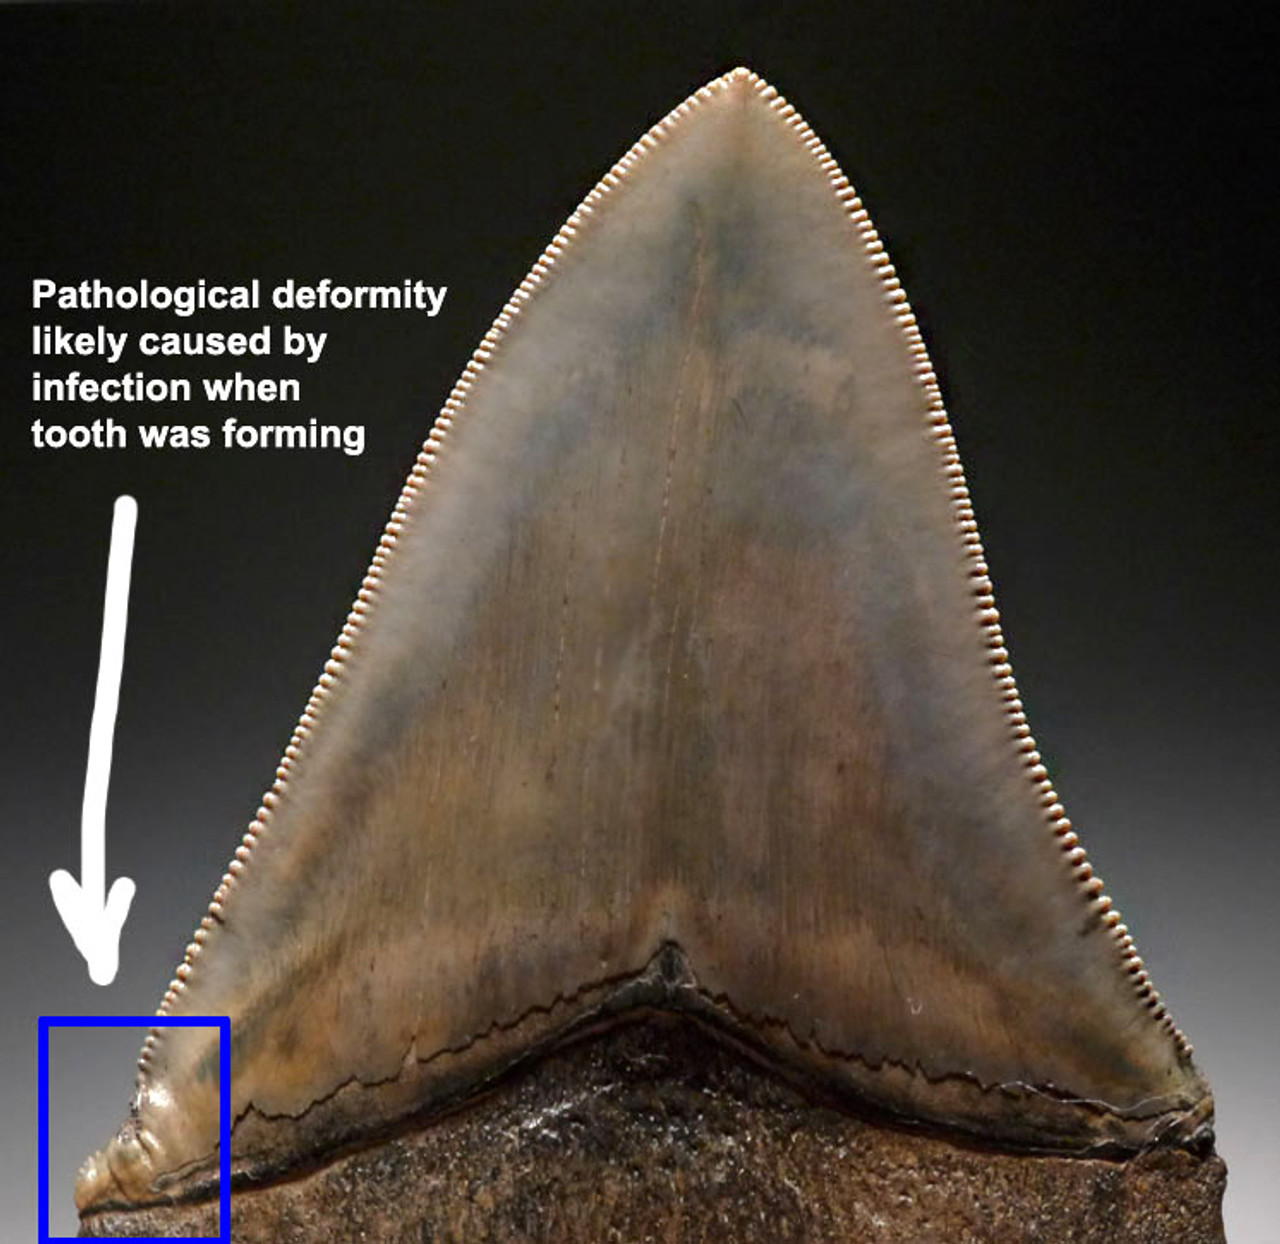 SH6-279 - FINEST INVESTMENT GRADE 3.9 INCH MEGALODON SHARK TOOTH WITH STUNNING PRESERVATION